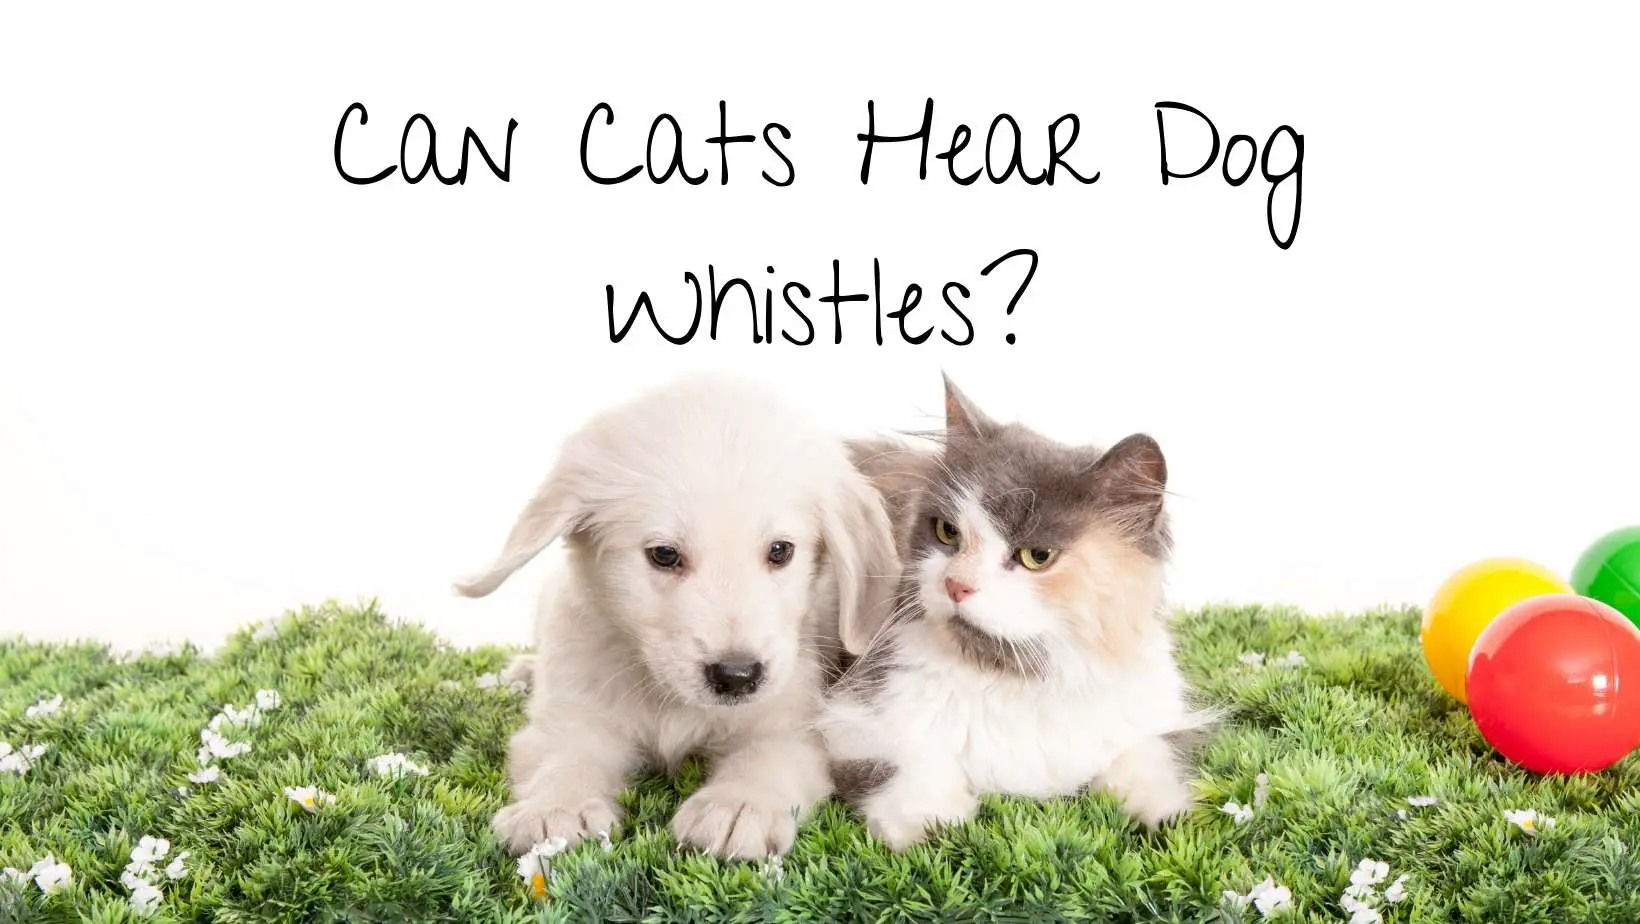 Can Cats Hear Dog Whistles?